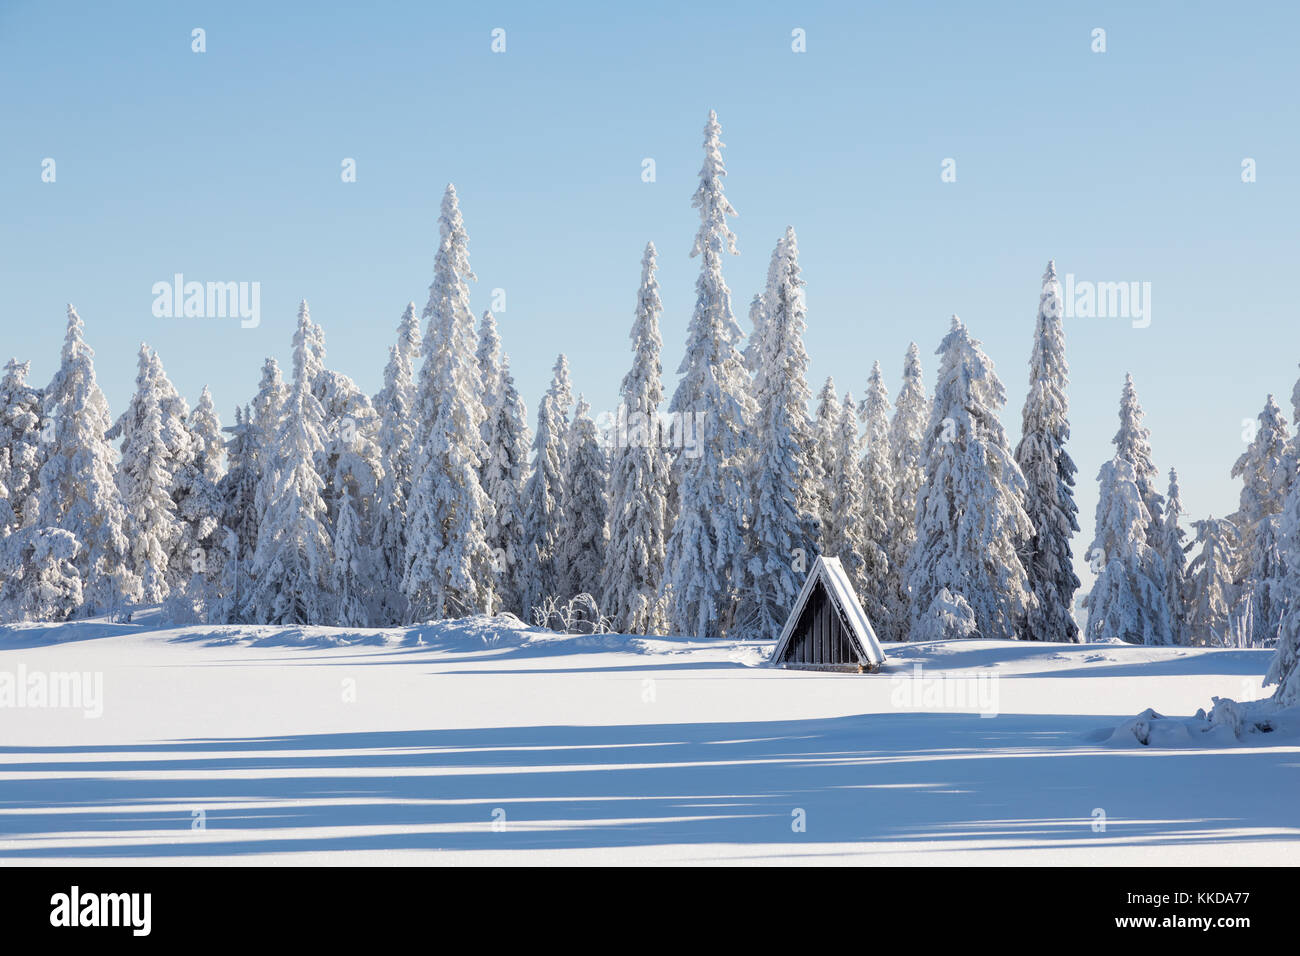 Frozen lake surrounded by trees with water pumping hut Stock Photo